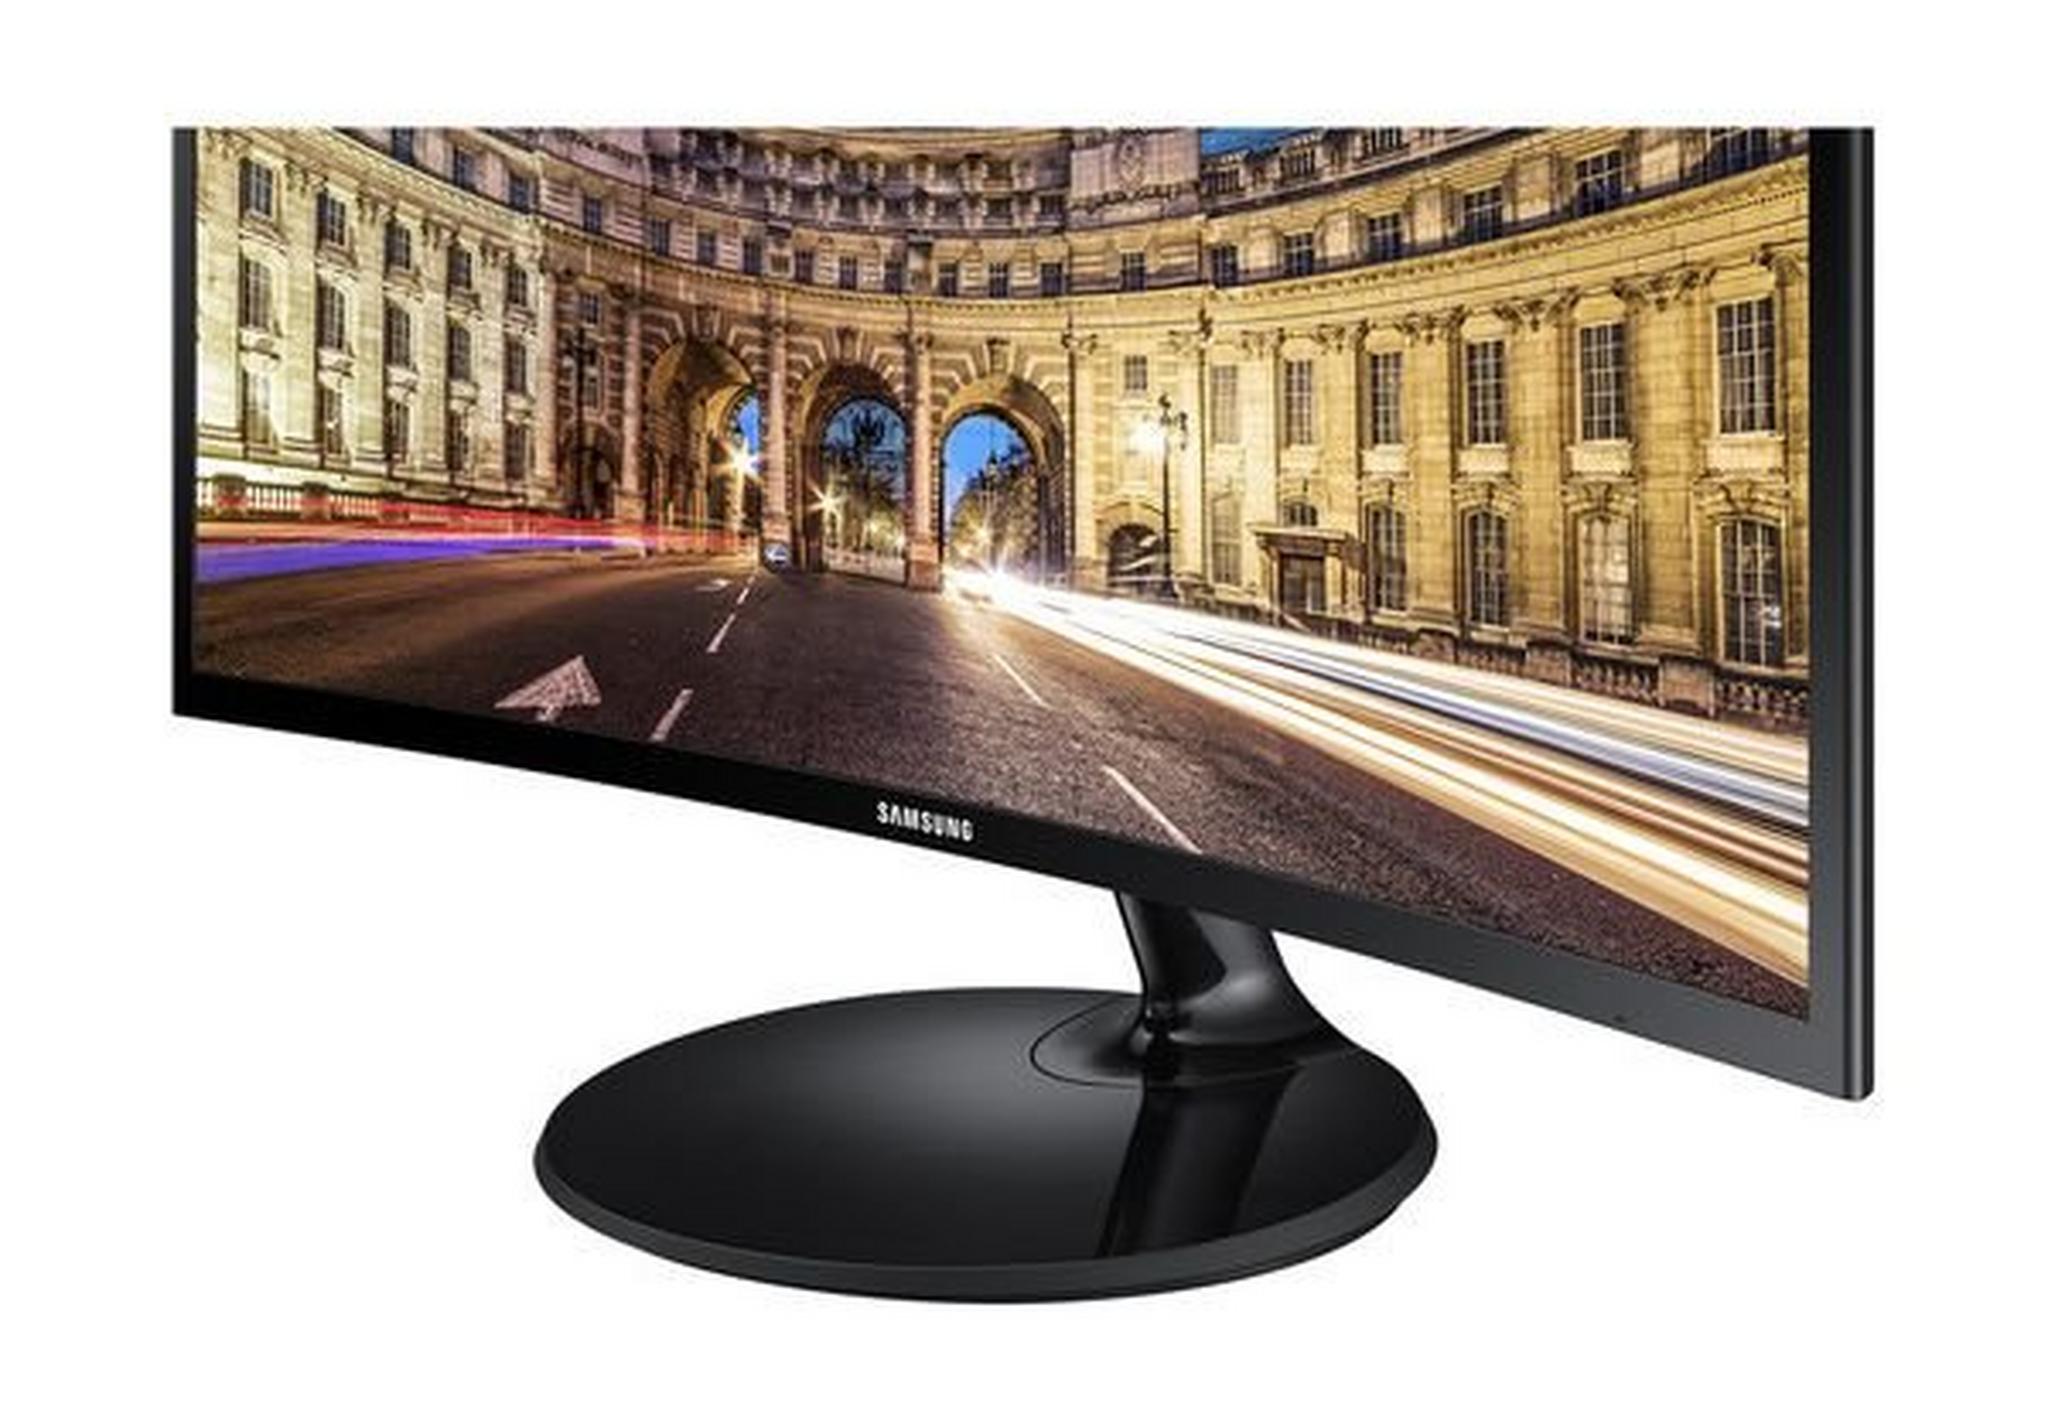 Samsung 390 Series  27-inch Full-HD Curved LED Monitor (LC27F390)